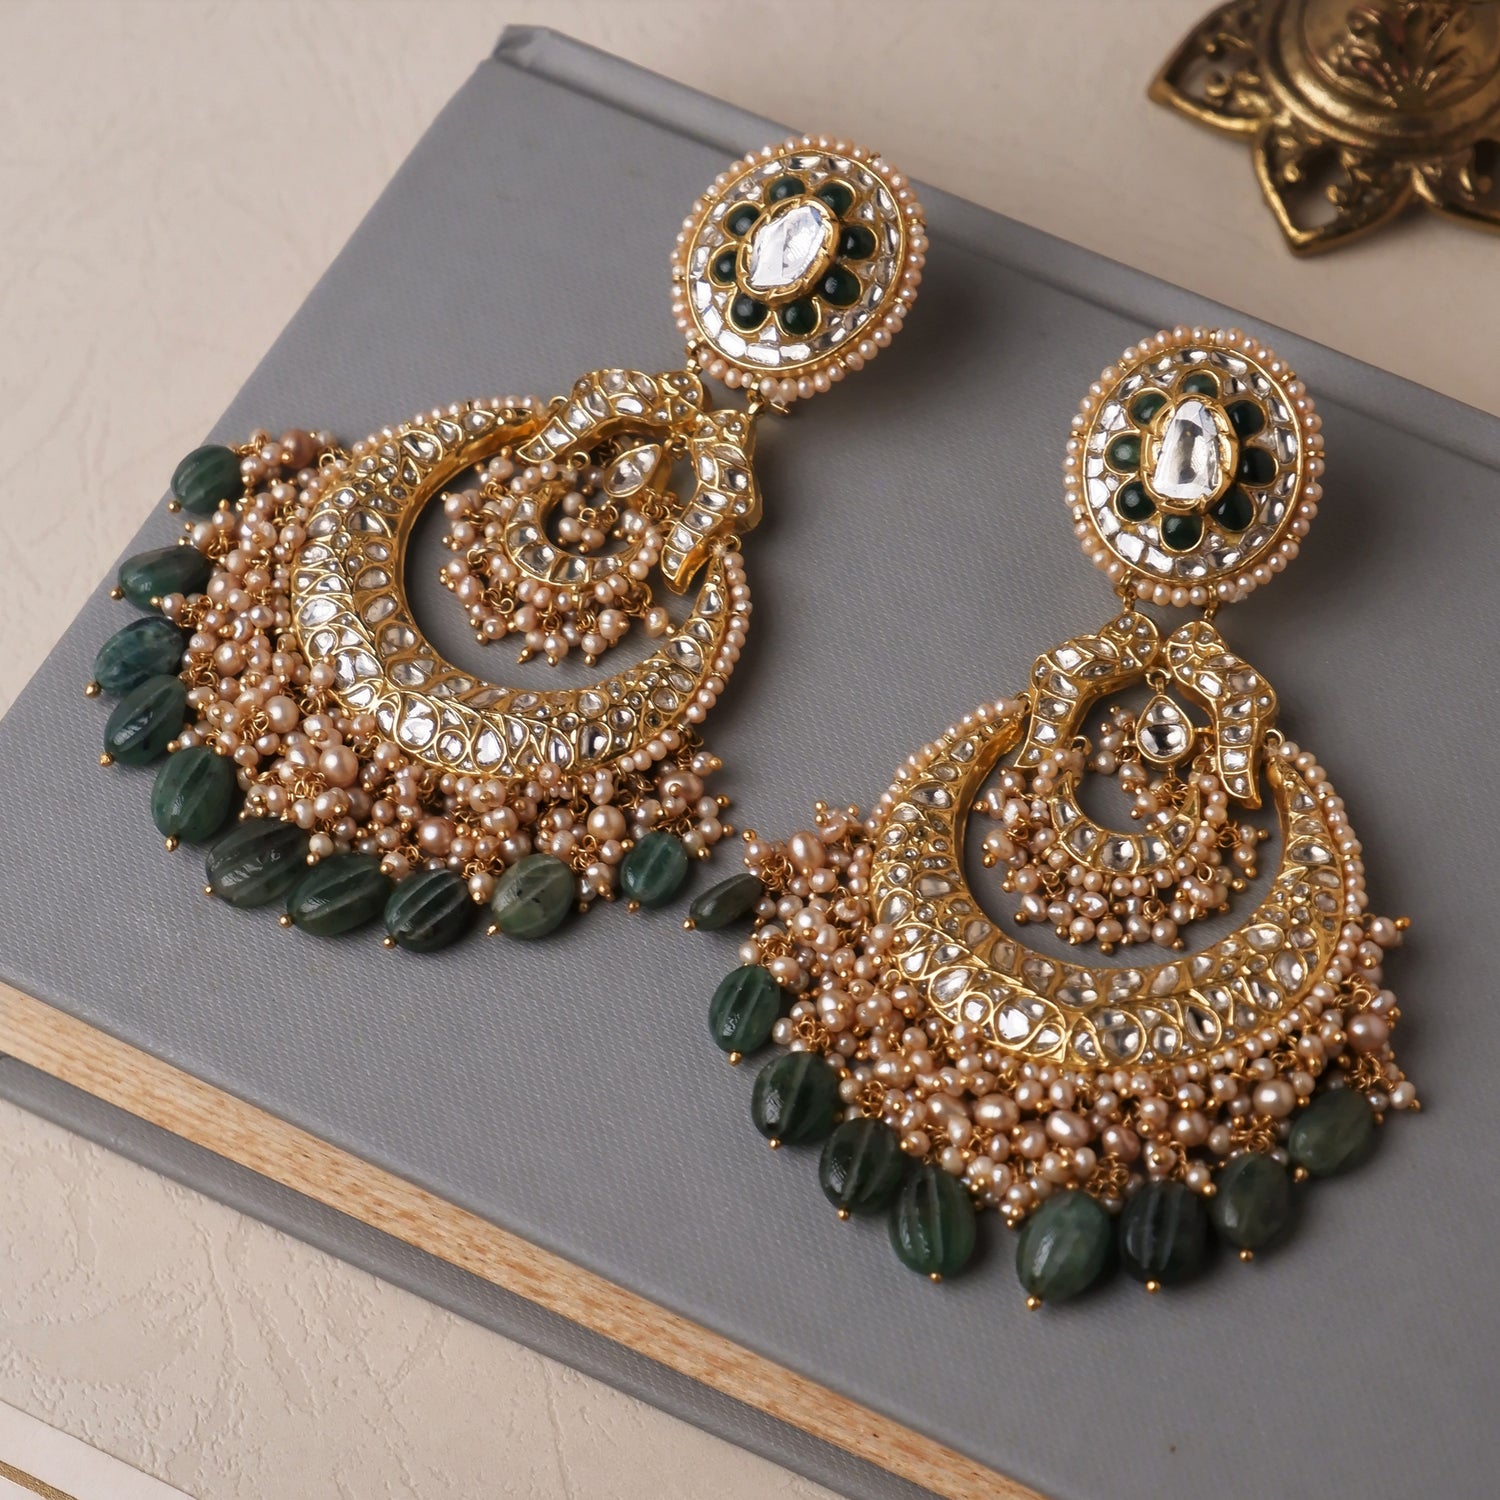 Ladies Long Chain Necklace Set, Occasion: Wedding at Rs 1500/set in Indore